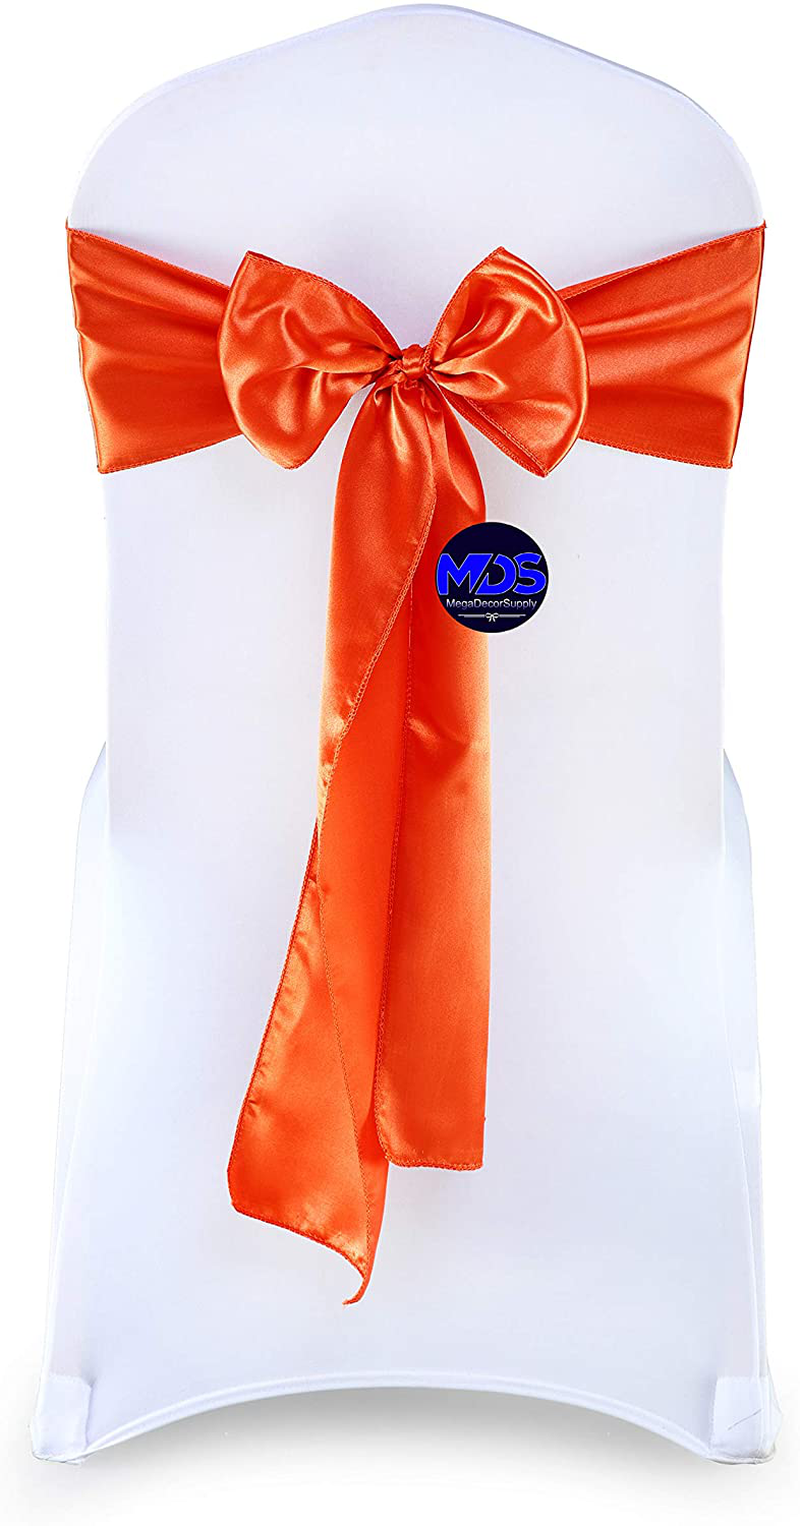 mds Pack of 25 Satin Chair Sashes Bow sash for Wedding and Events Supplies Party Decoration Chair Cover sash -Gold Arts & Entertainment > Party & Celebration > Party Supplies mds Brunt Orange 25 